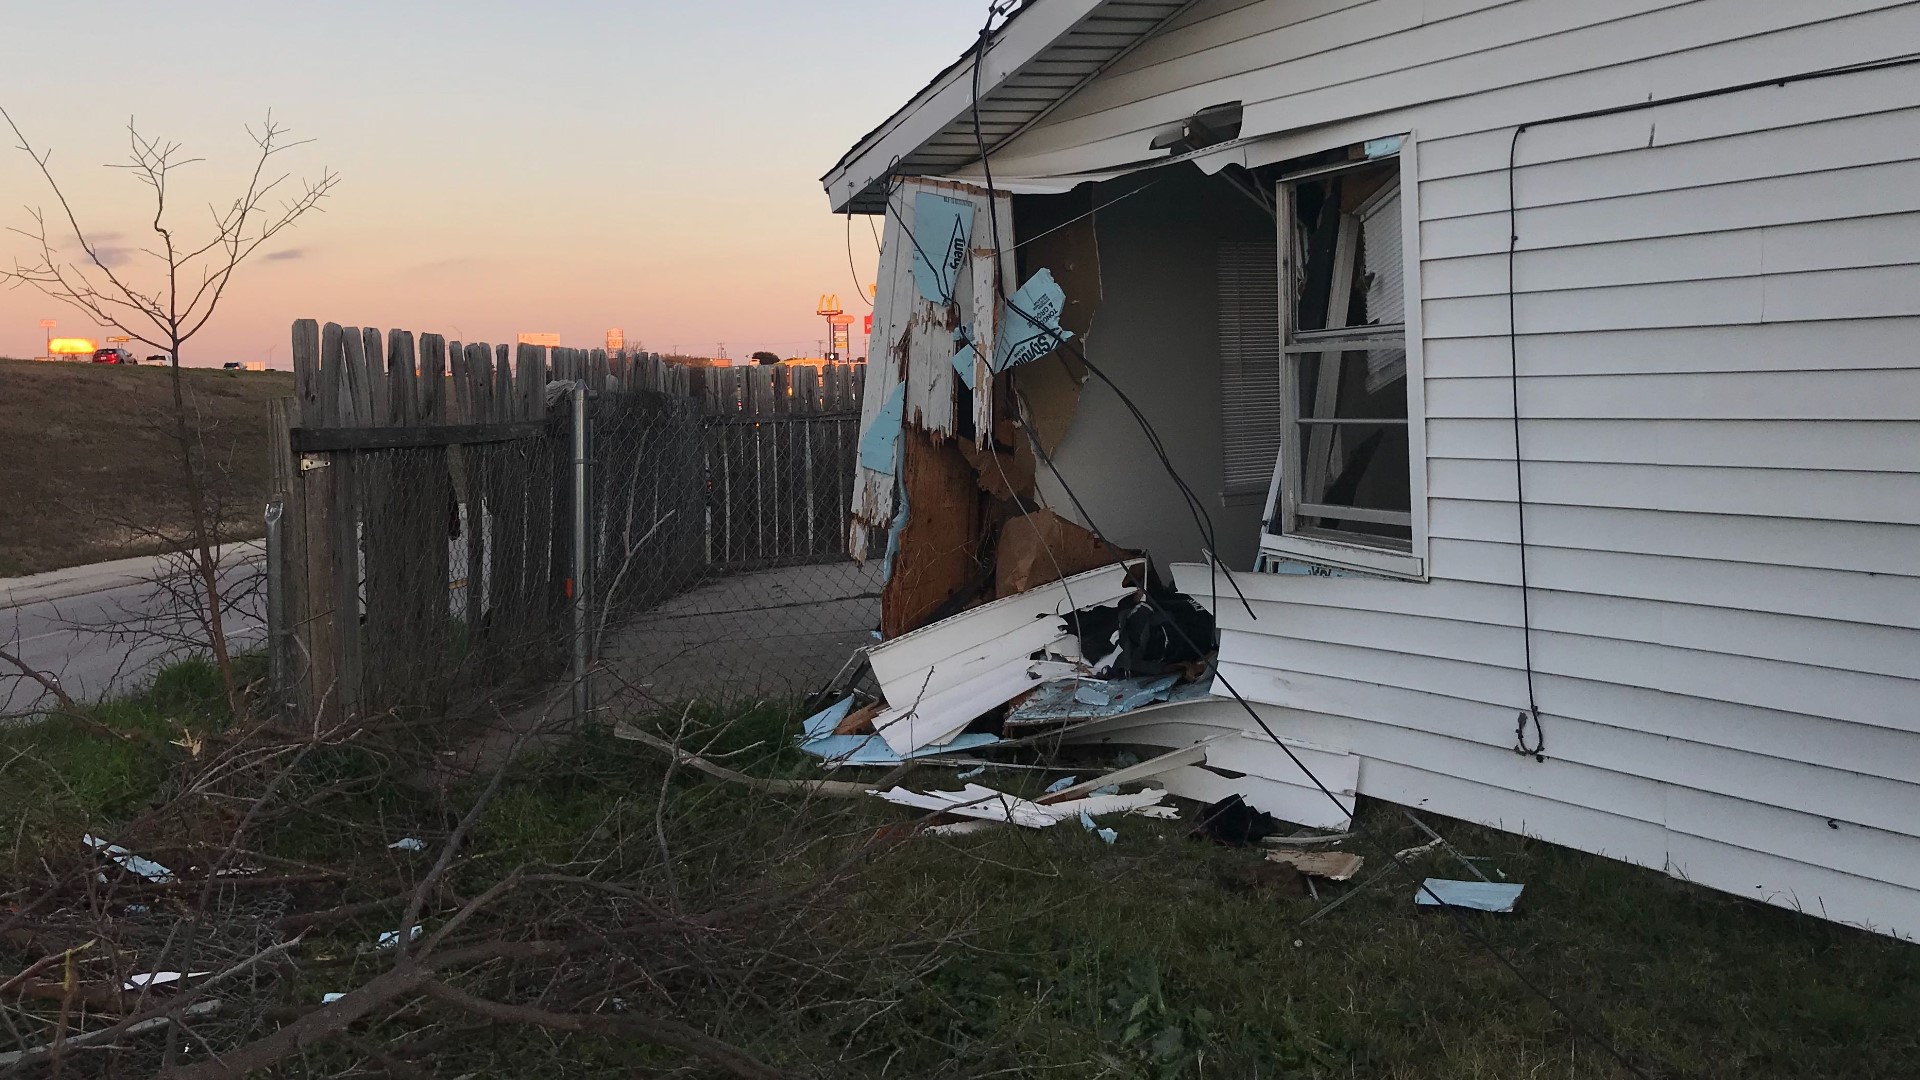 One person arrested after crashing into a home in Killeen early Tuesday morning.